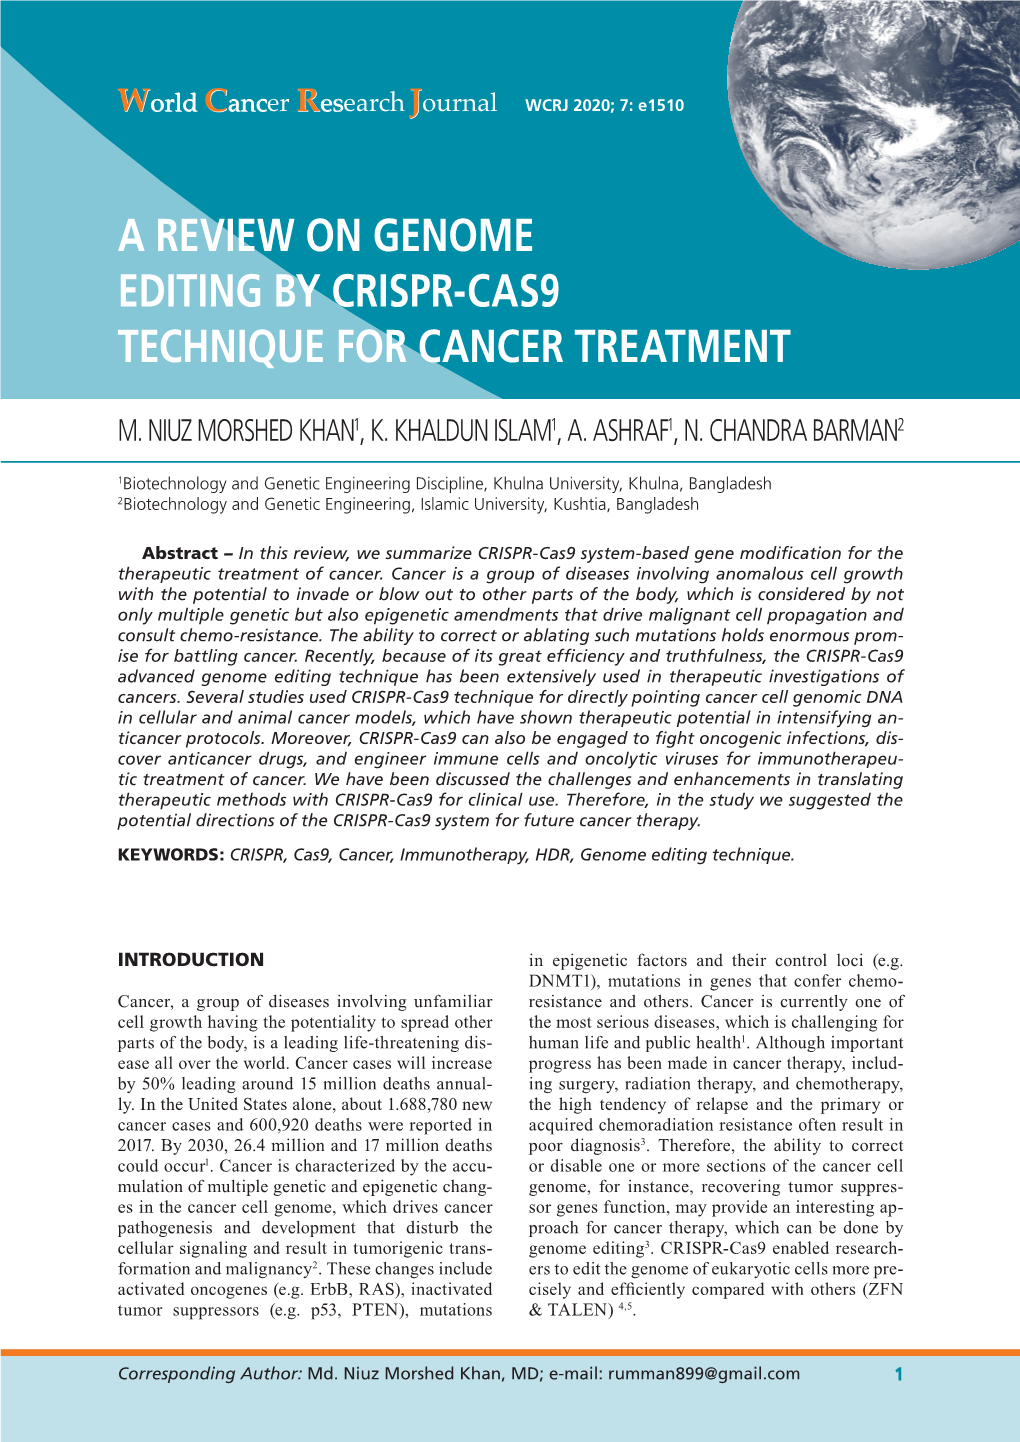 A Review on Genome Editing by Crispr-Cas9 Technique for Cancer Treatment